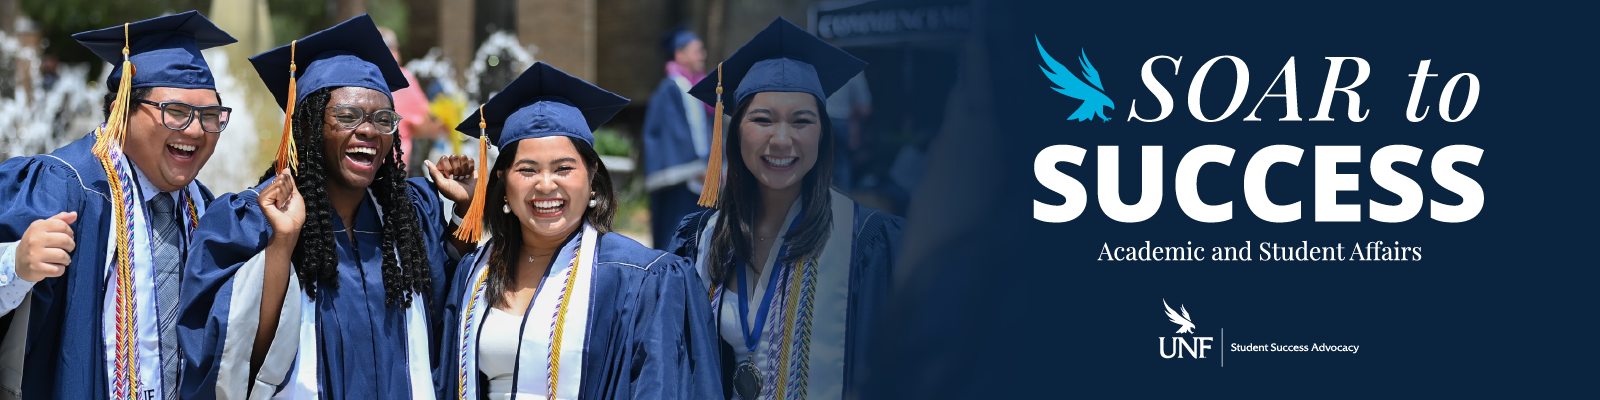 UNF Graduates smiling text of Soar to Success Academic and Student affairs with the Student Success Advocacy logo